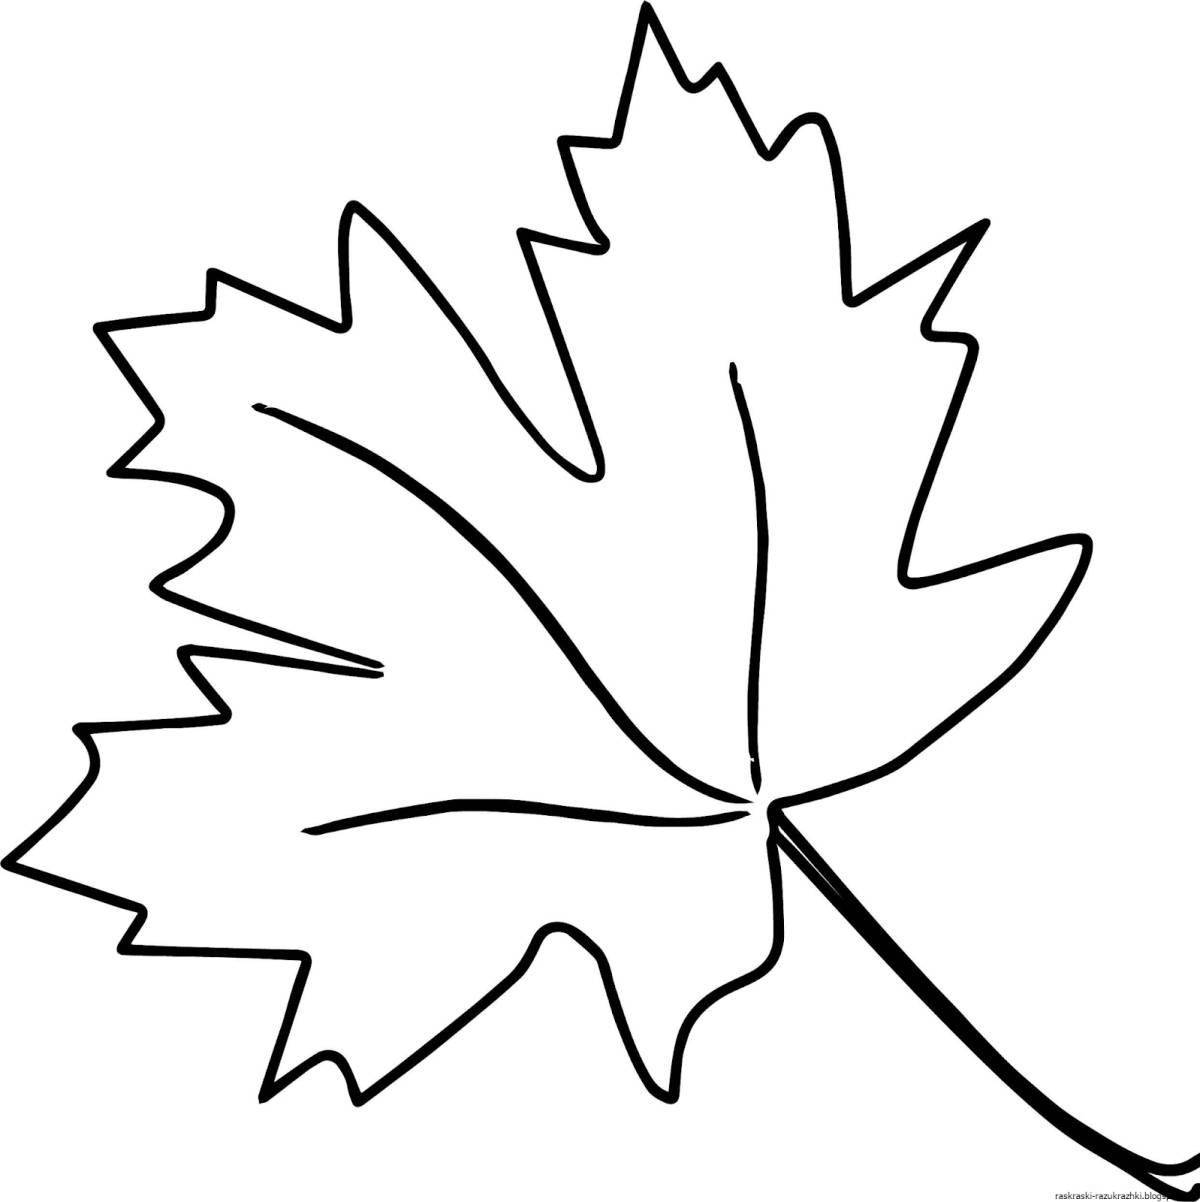 Coloring maple leaf for kids